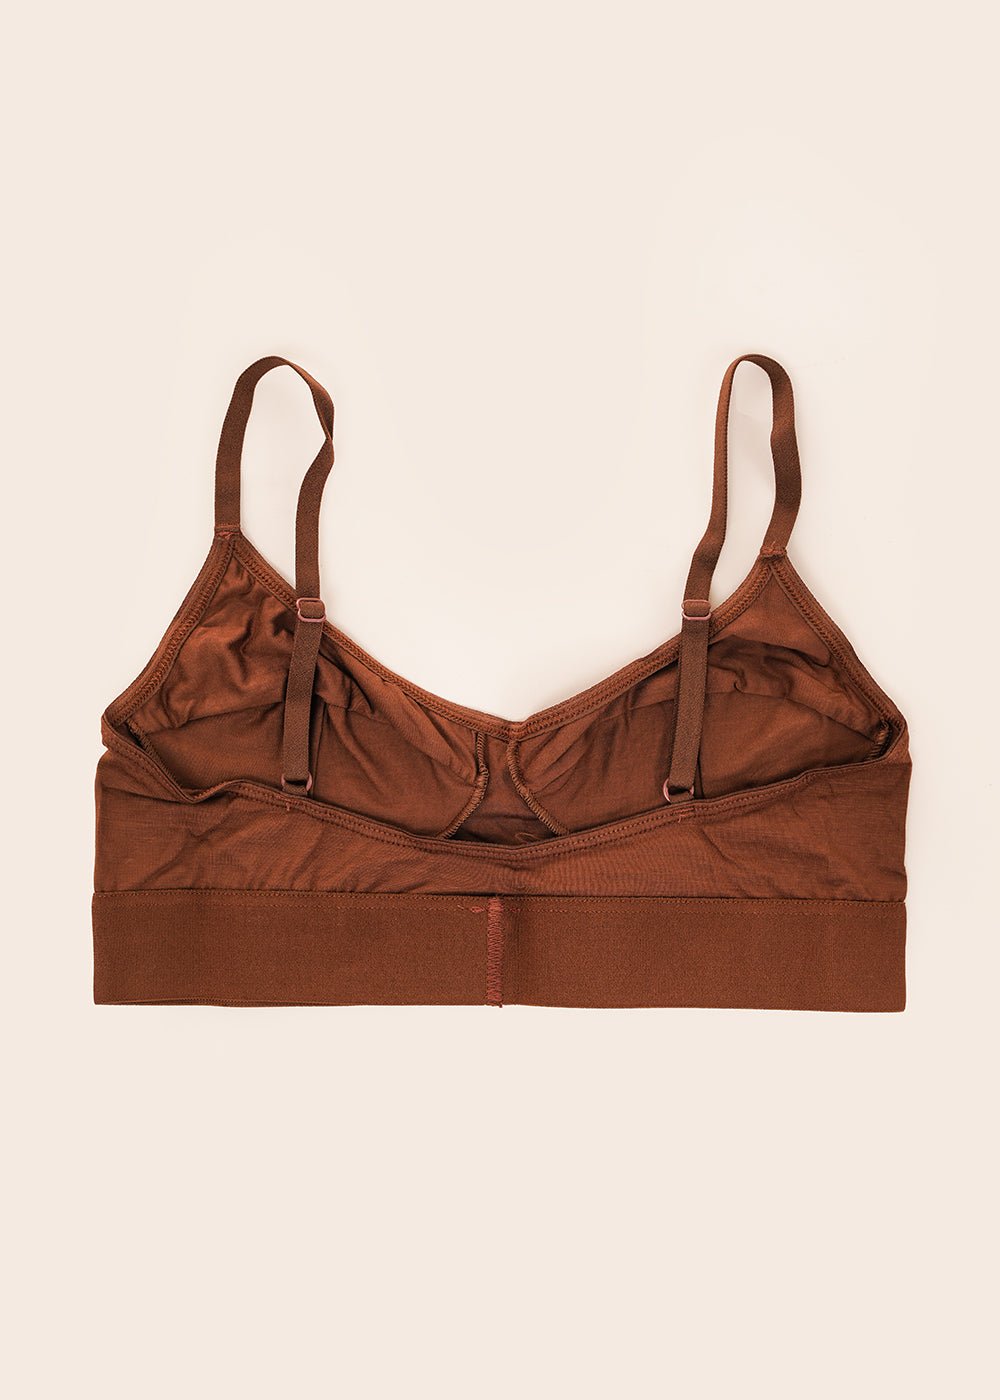 Bra New Fashion: Embracing the Evolution of Intimate Wear